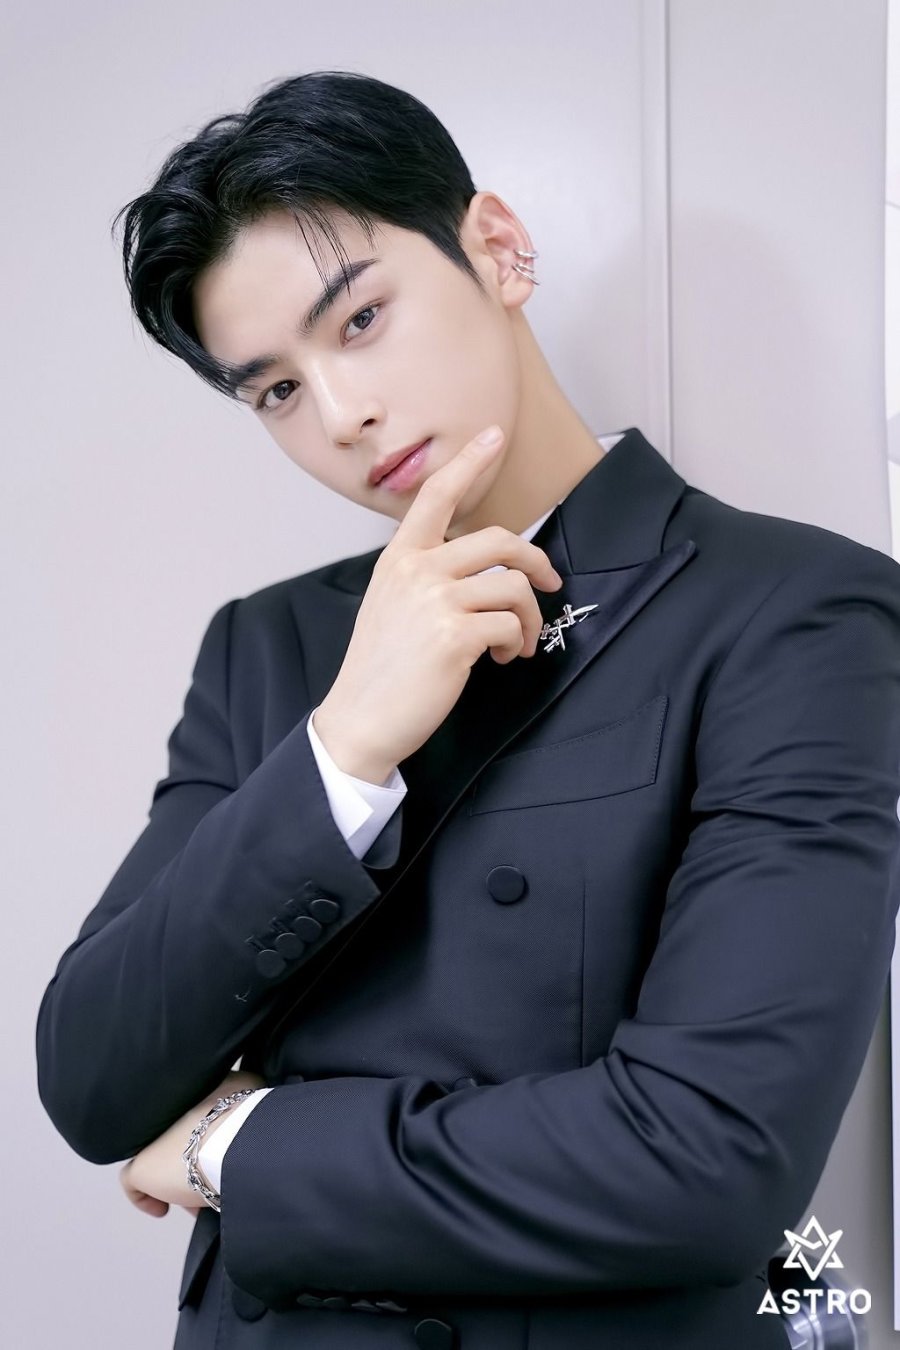 ASTRO's Cha Eun Woo confirmed to star in new fantasy romance drama